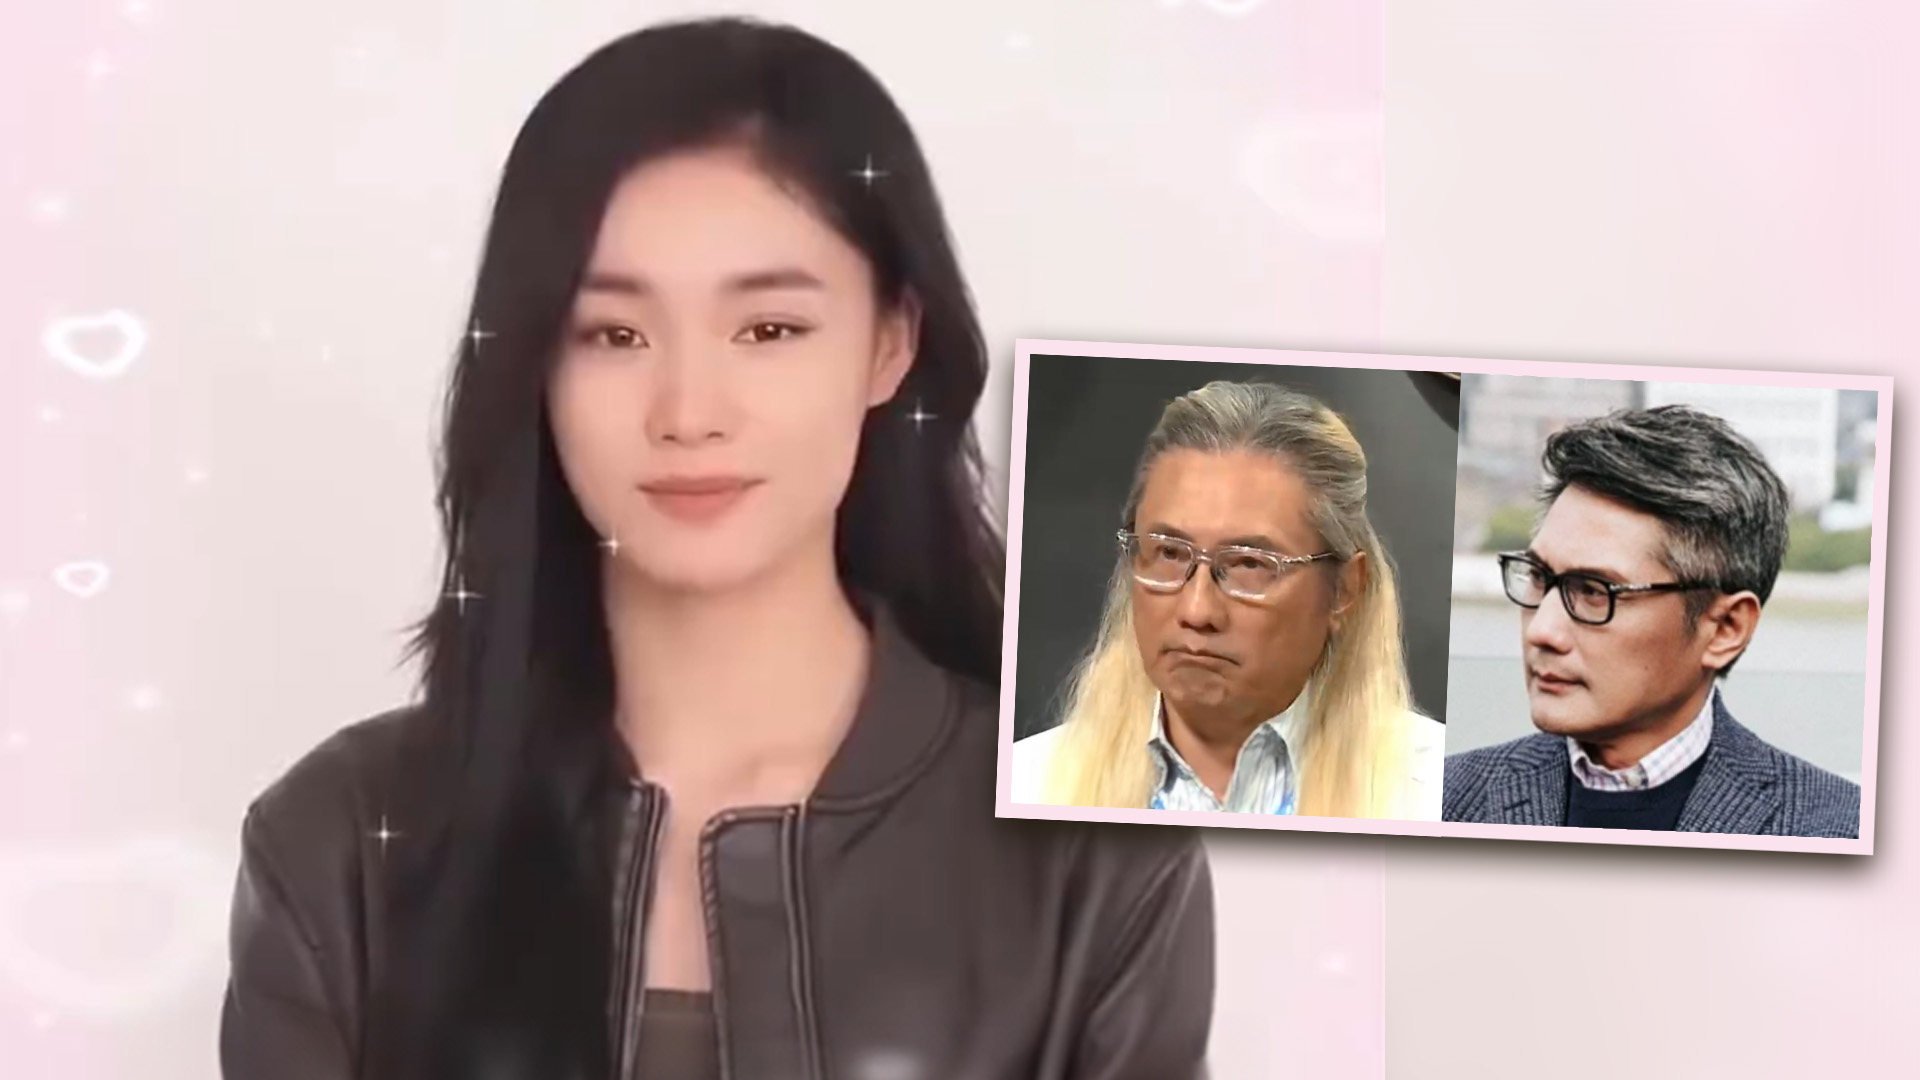 A famous Taiwan singer has recreated his late daughter who died of cancer using artificial intelligence technology so that she could sing a birthday song to her grieving mother. Photo: SCMP composite/Weibo/Facebook